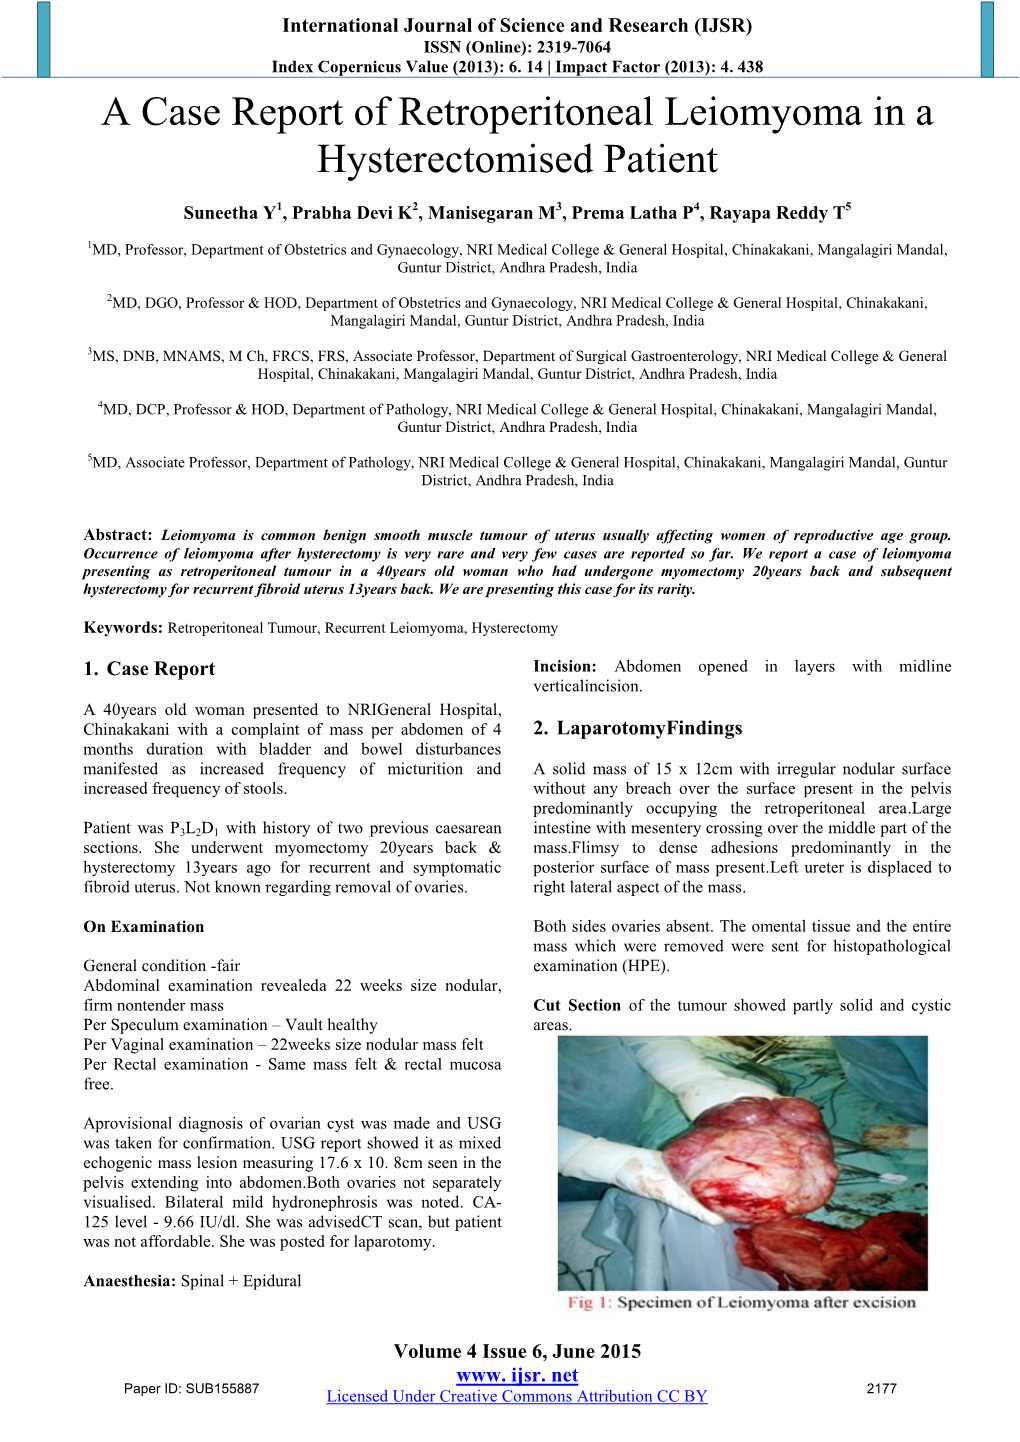 A Case Report of Retroperitoneal Leiomyoma in a Hysterectomised Patient